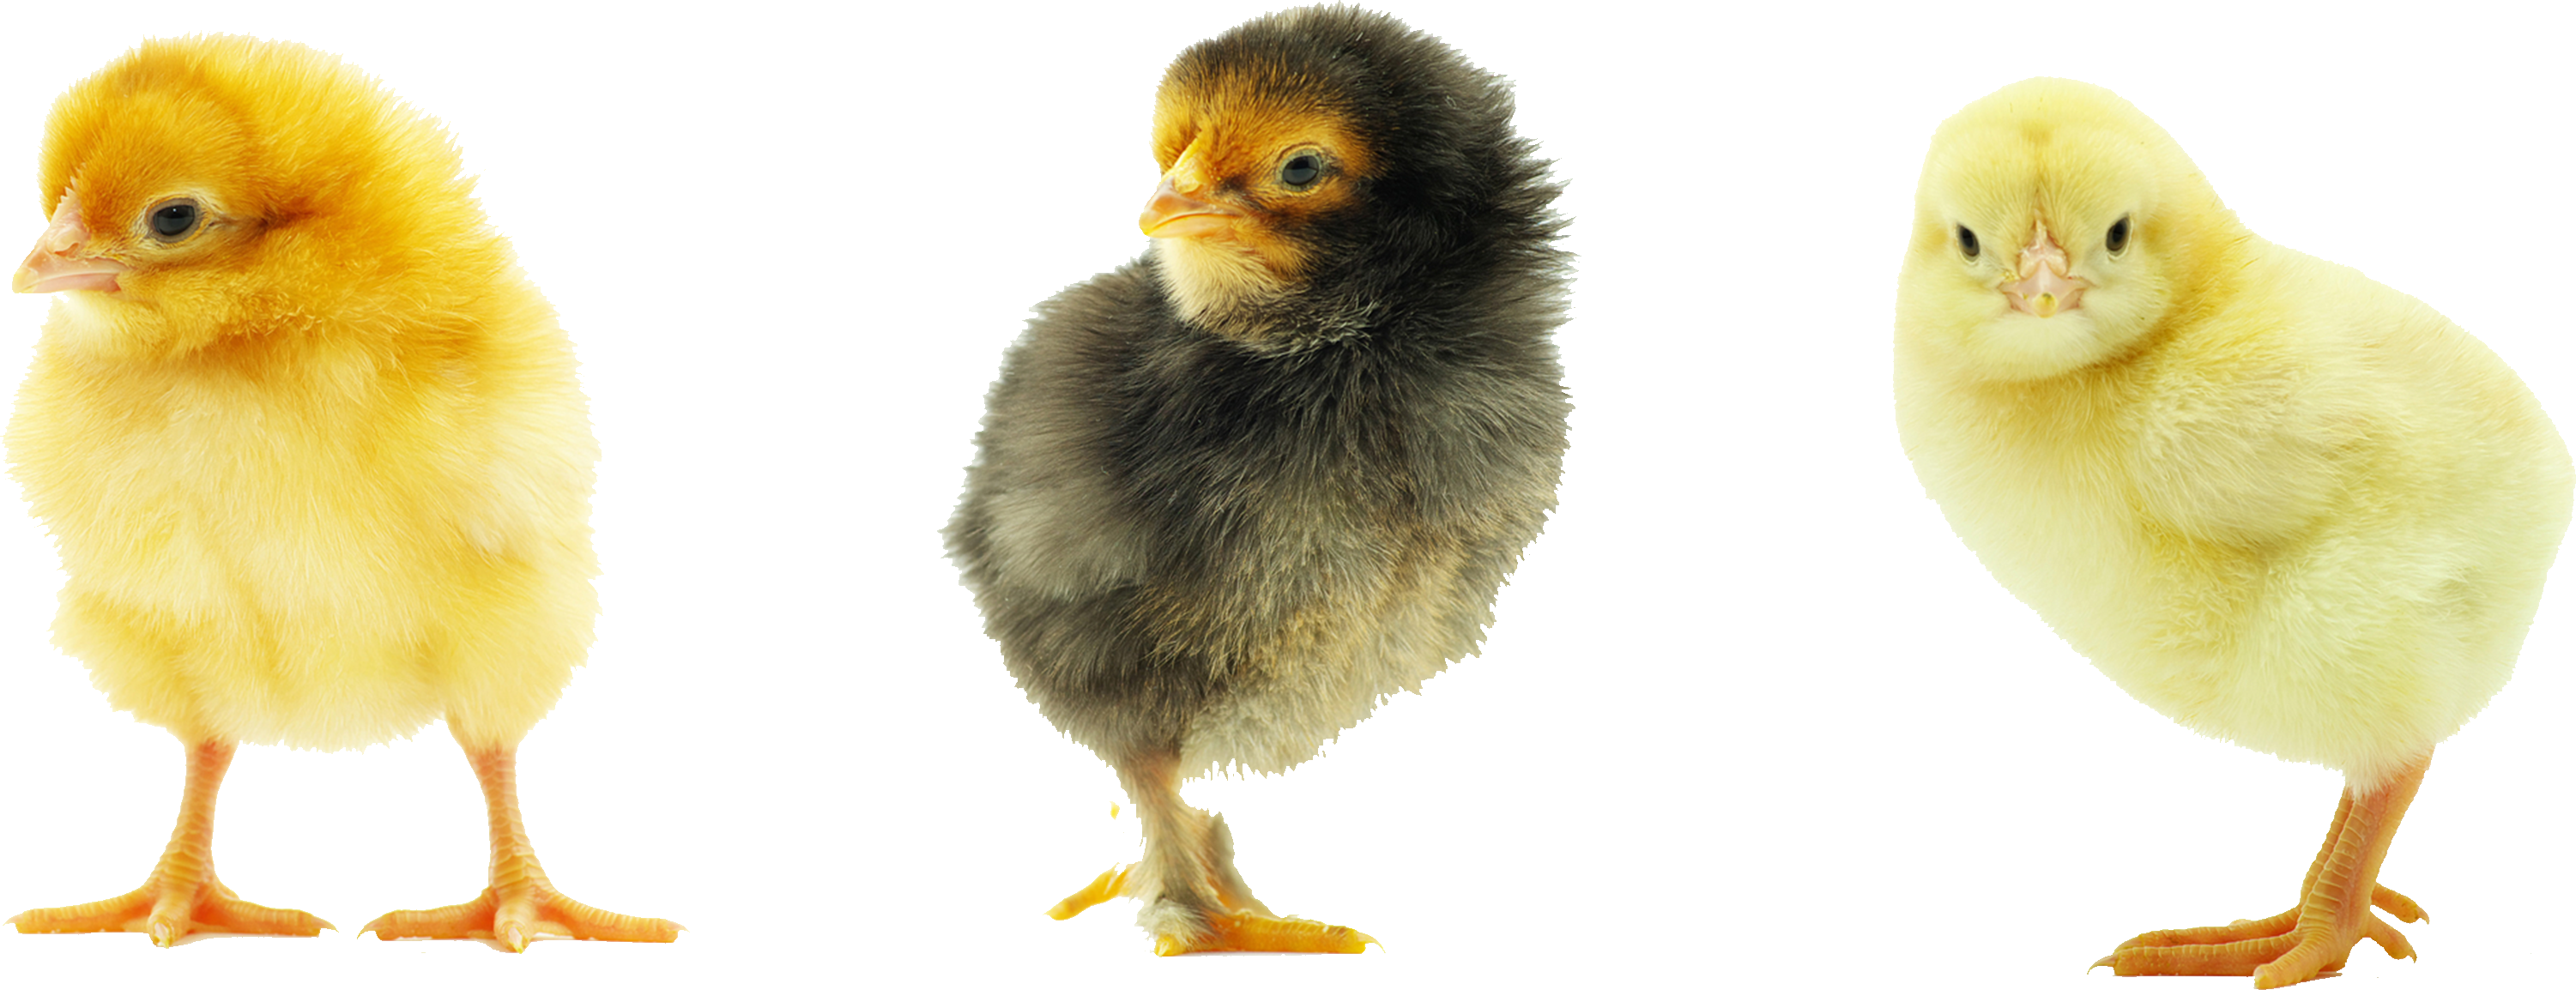 Chick PNG Images HD